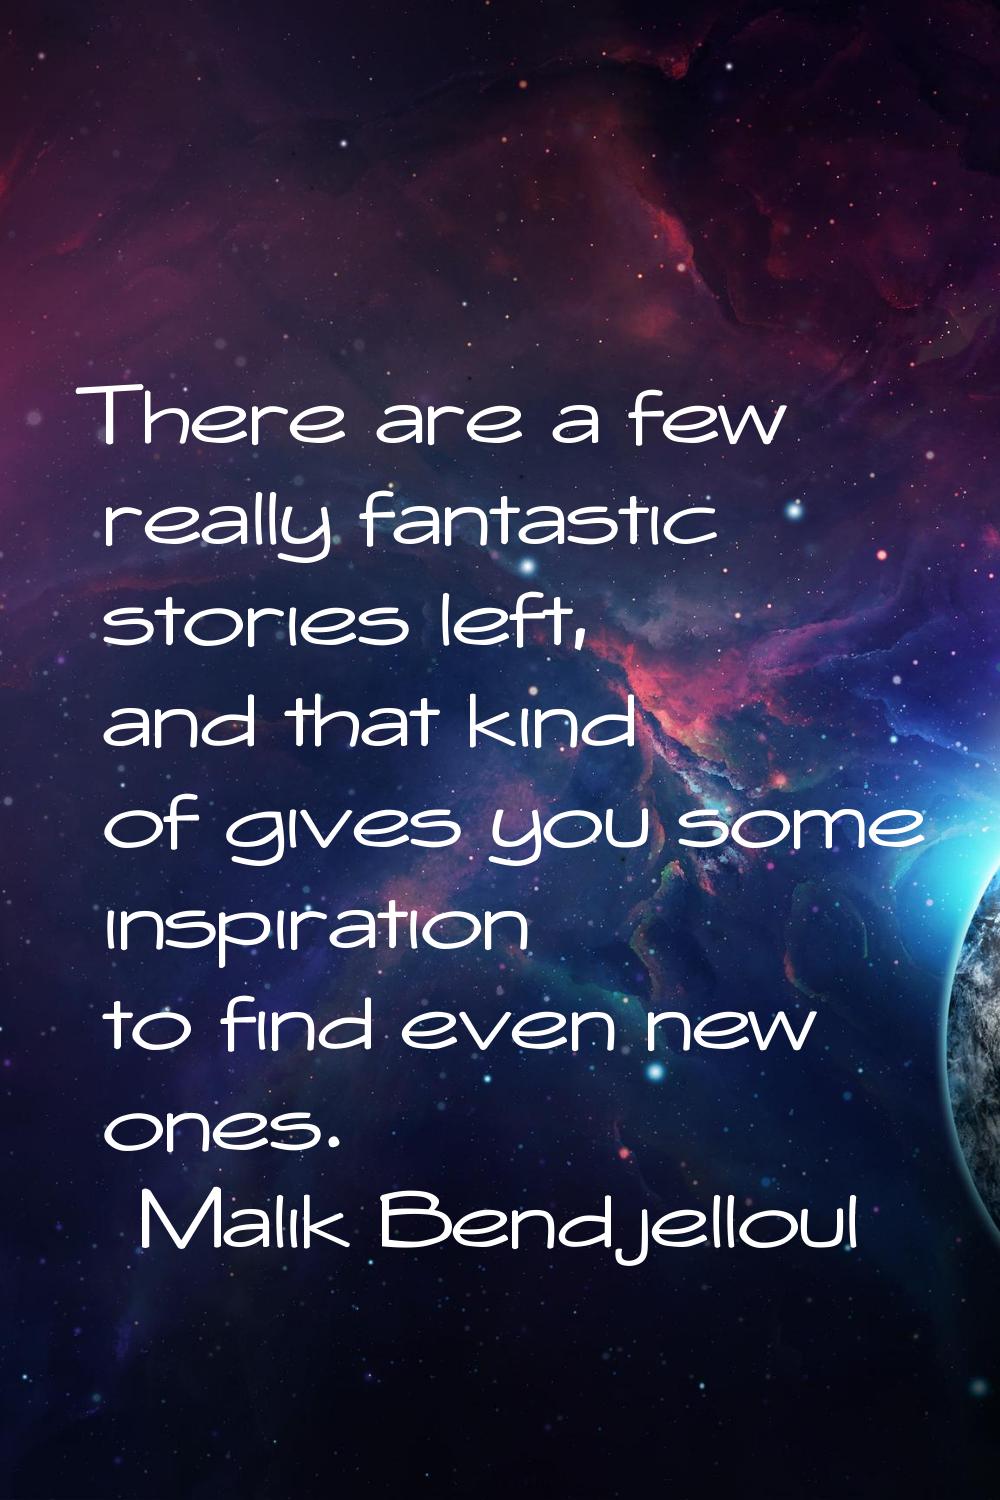 There are a few really fantastic stories left, and that kind of gives you some inspiration to find 